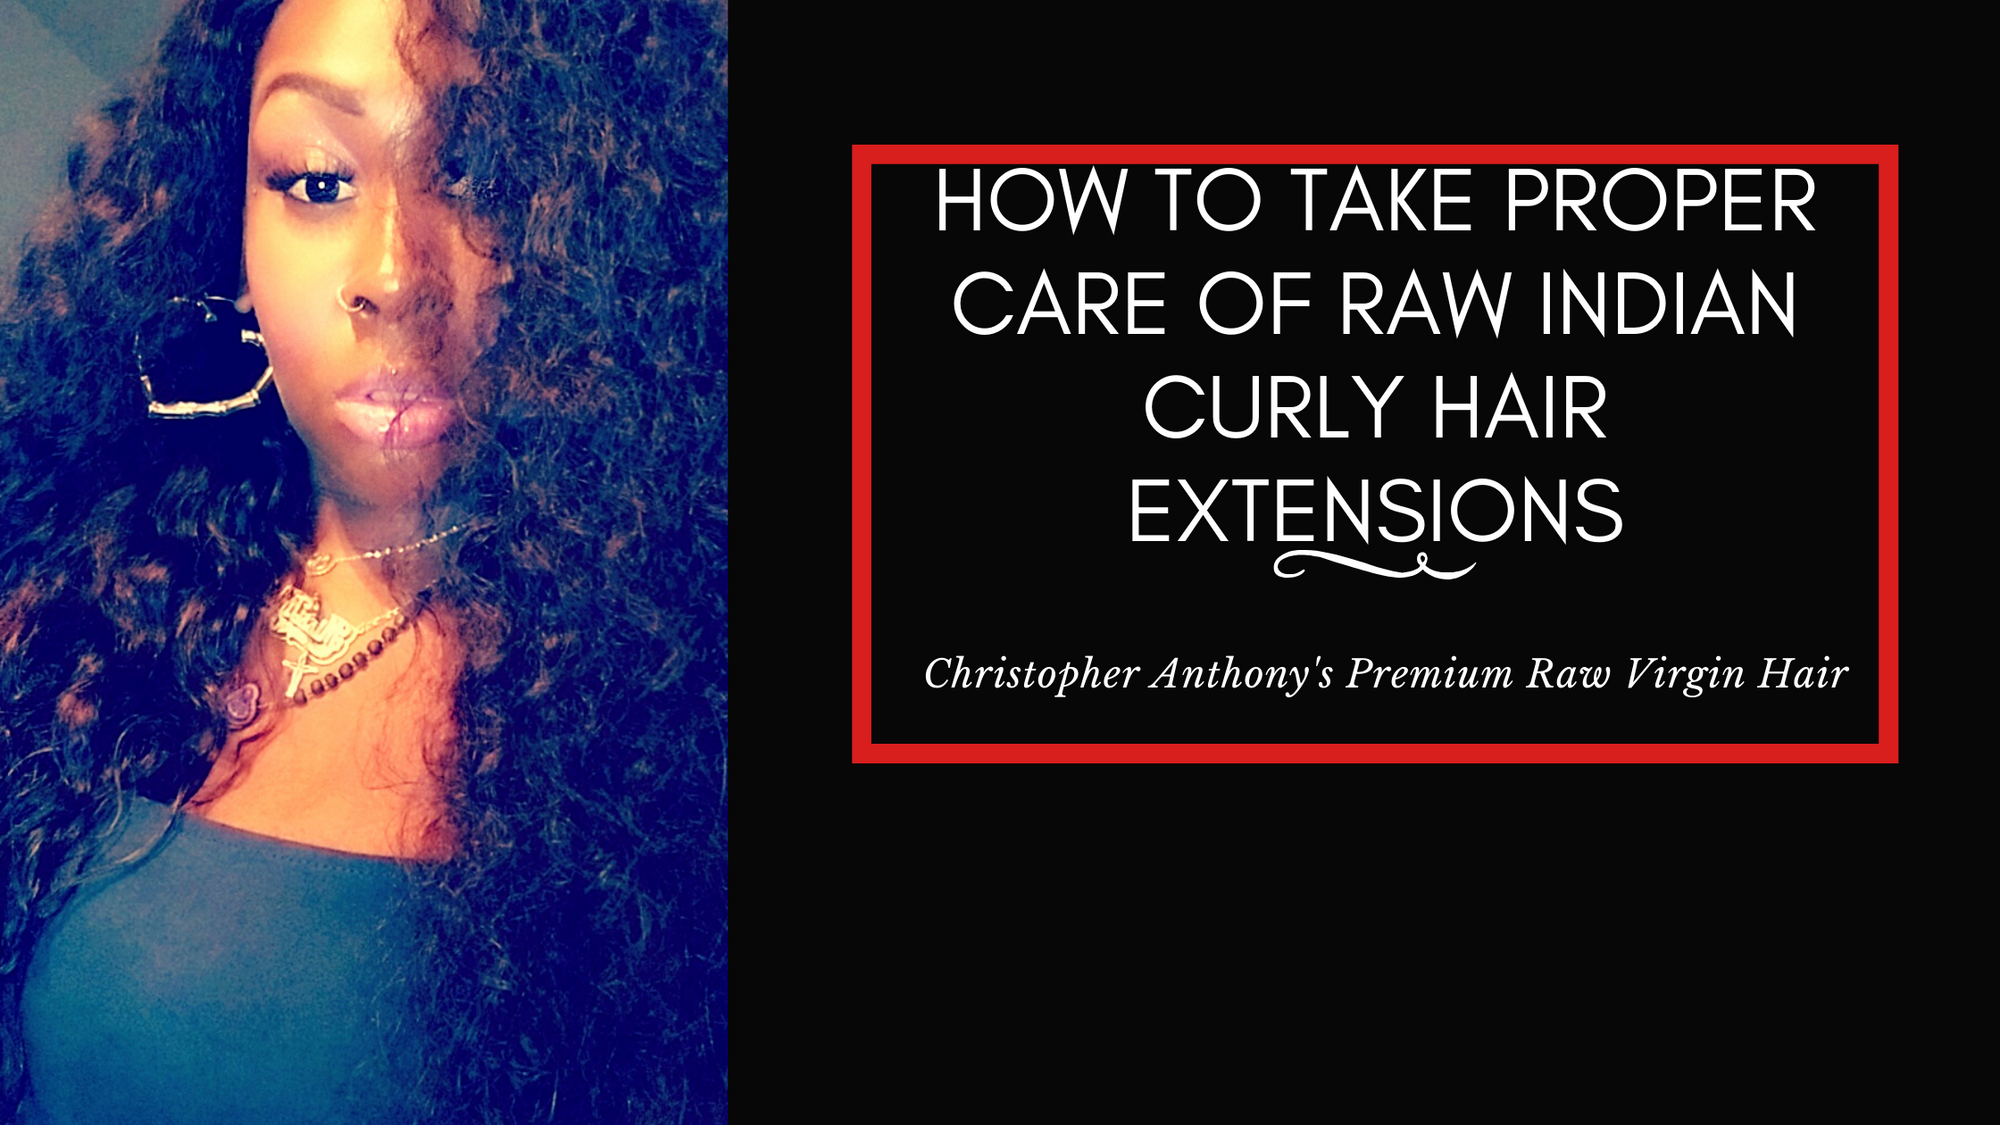 How to Take Proper Care of Raw Indian Curly Hair Extensions